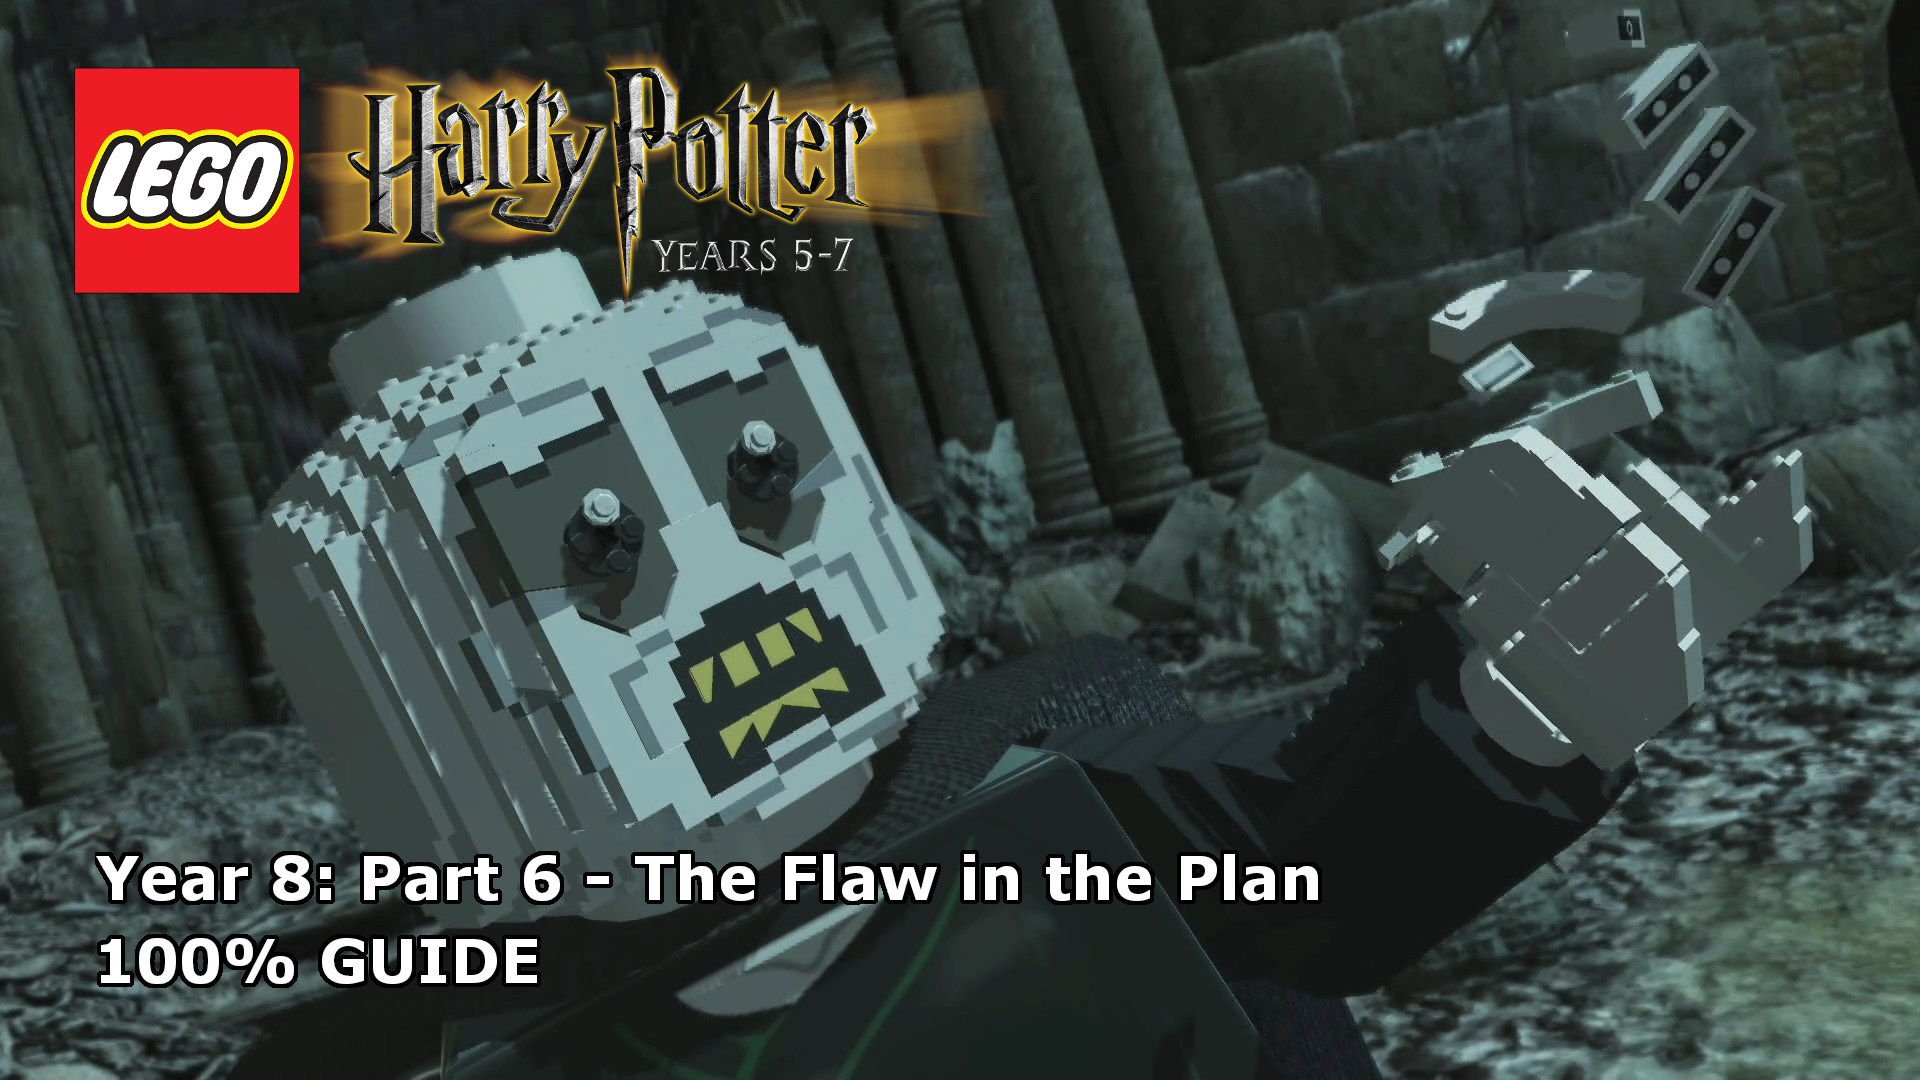 Planned All Along: LEGO Harry Potter: Years 5-7 (Part 1)